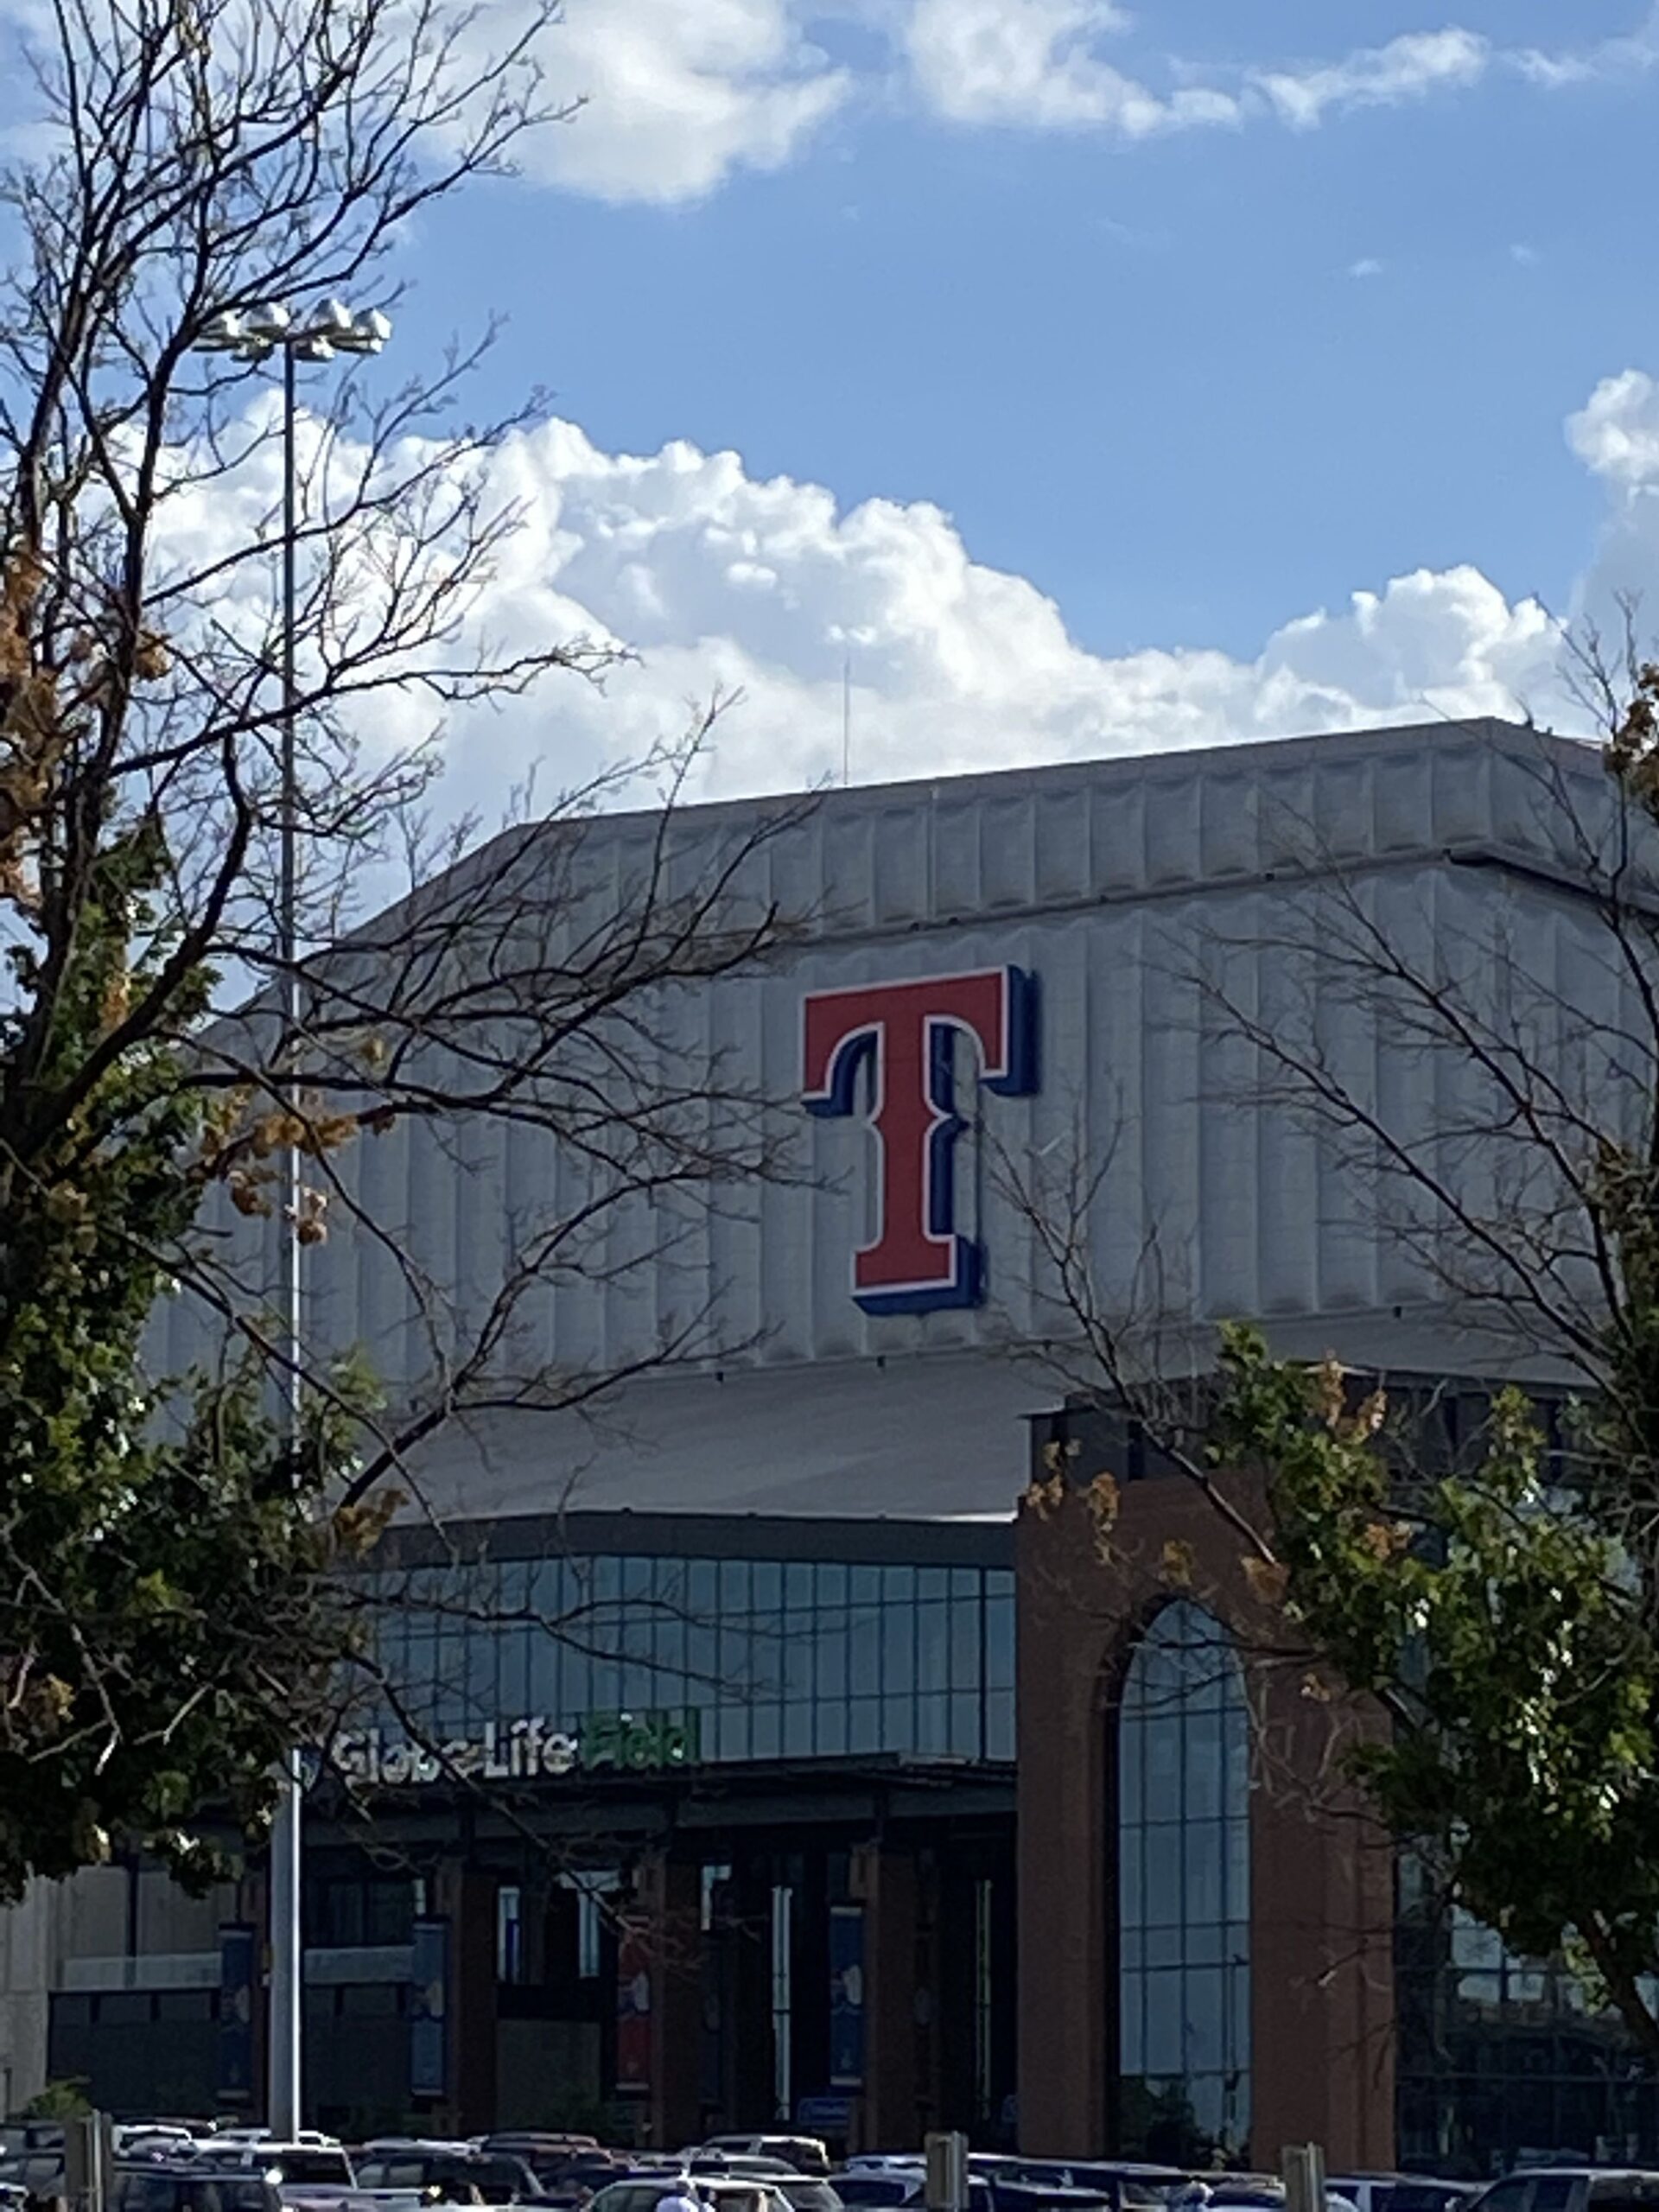 The Texas Rangers' new, modern stadium will be no match for Globe Life Park  on its best days